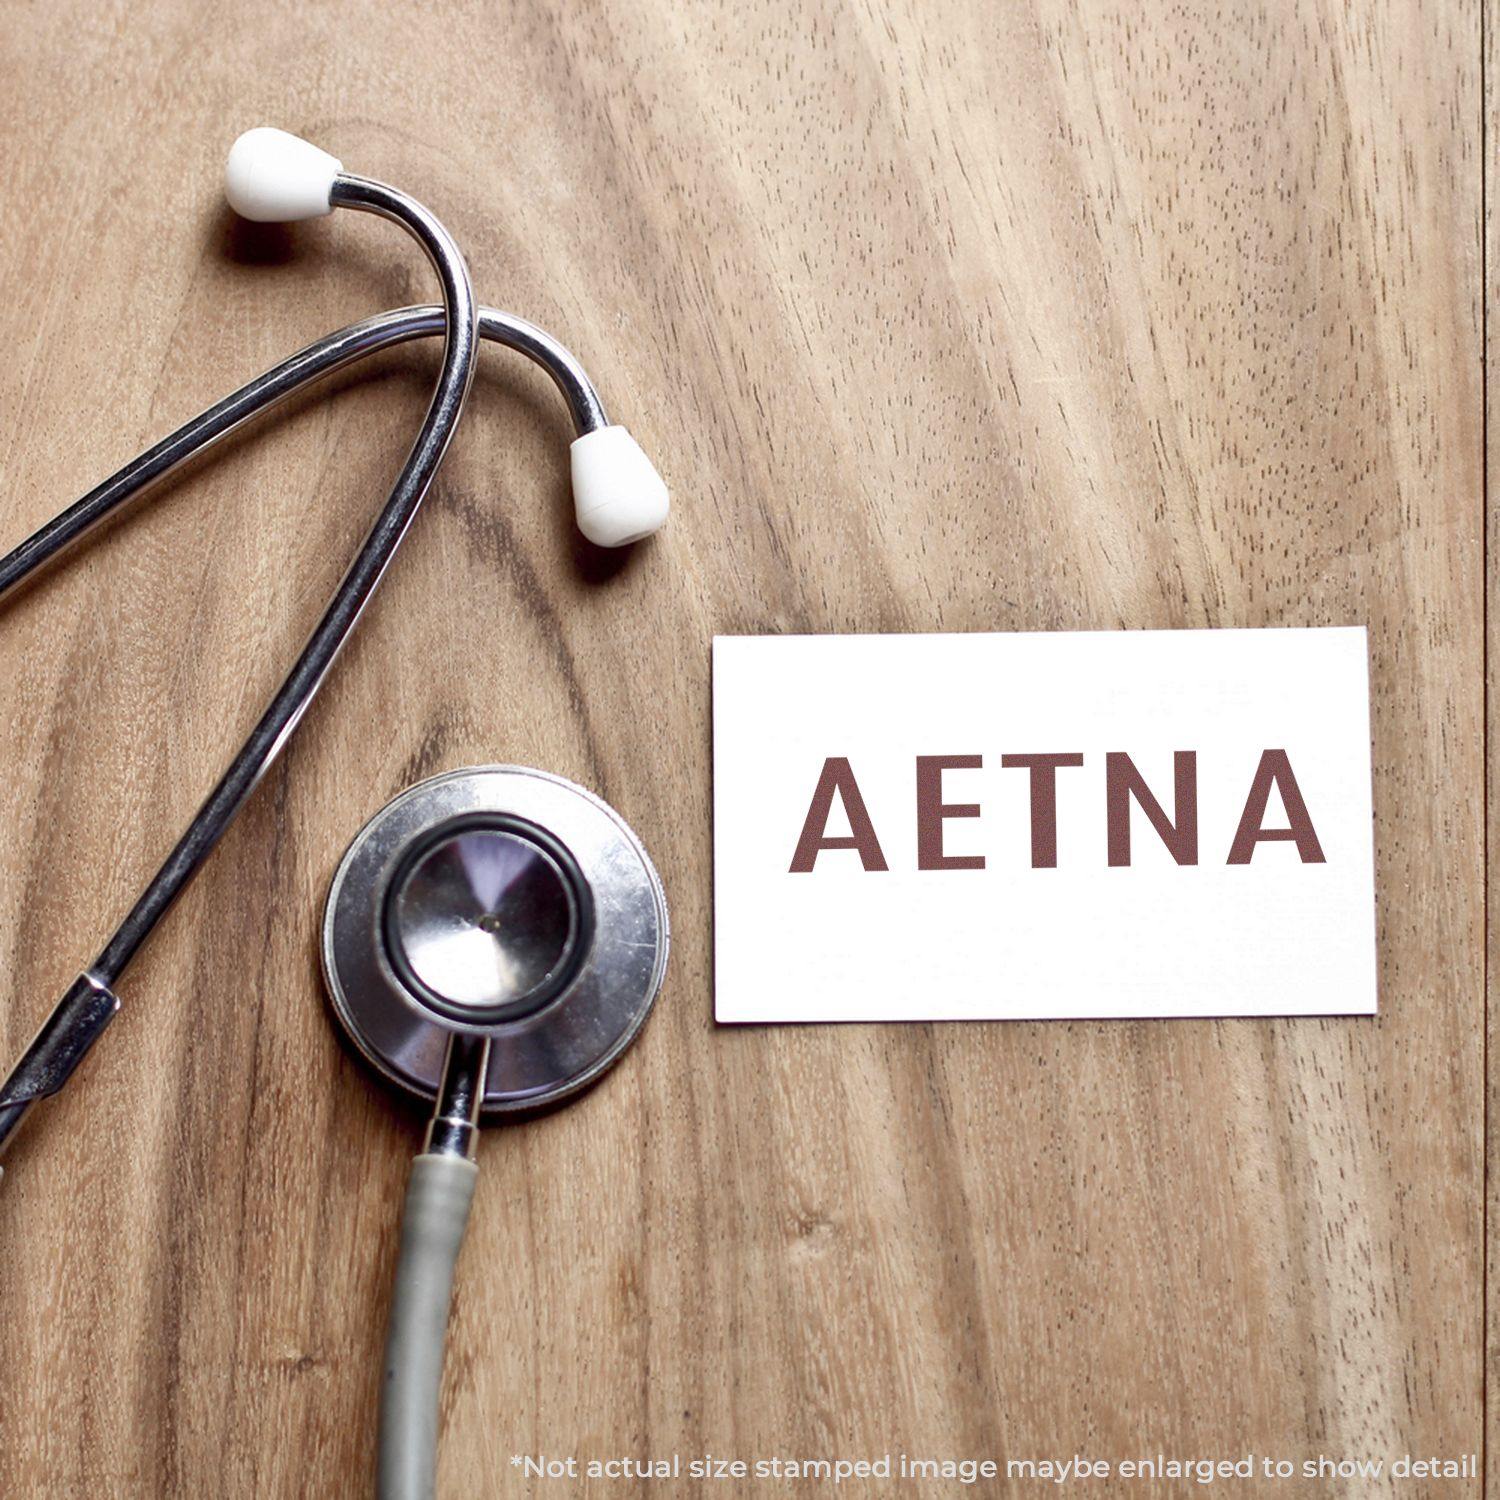 A stock office medical rubber stamp with a stamped image showing how the text "AETNA" is displayed after stamping.